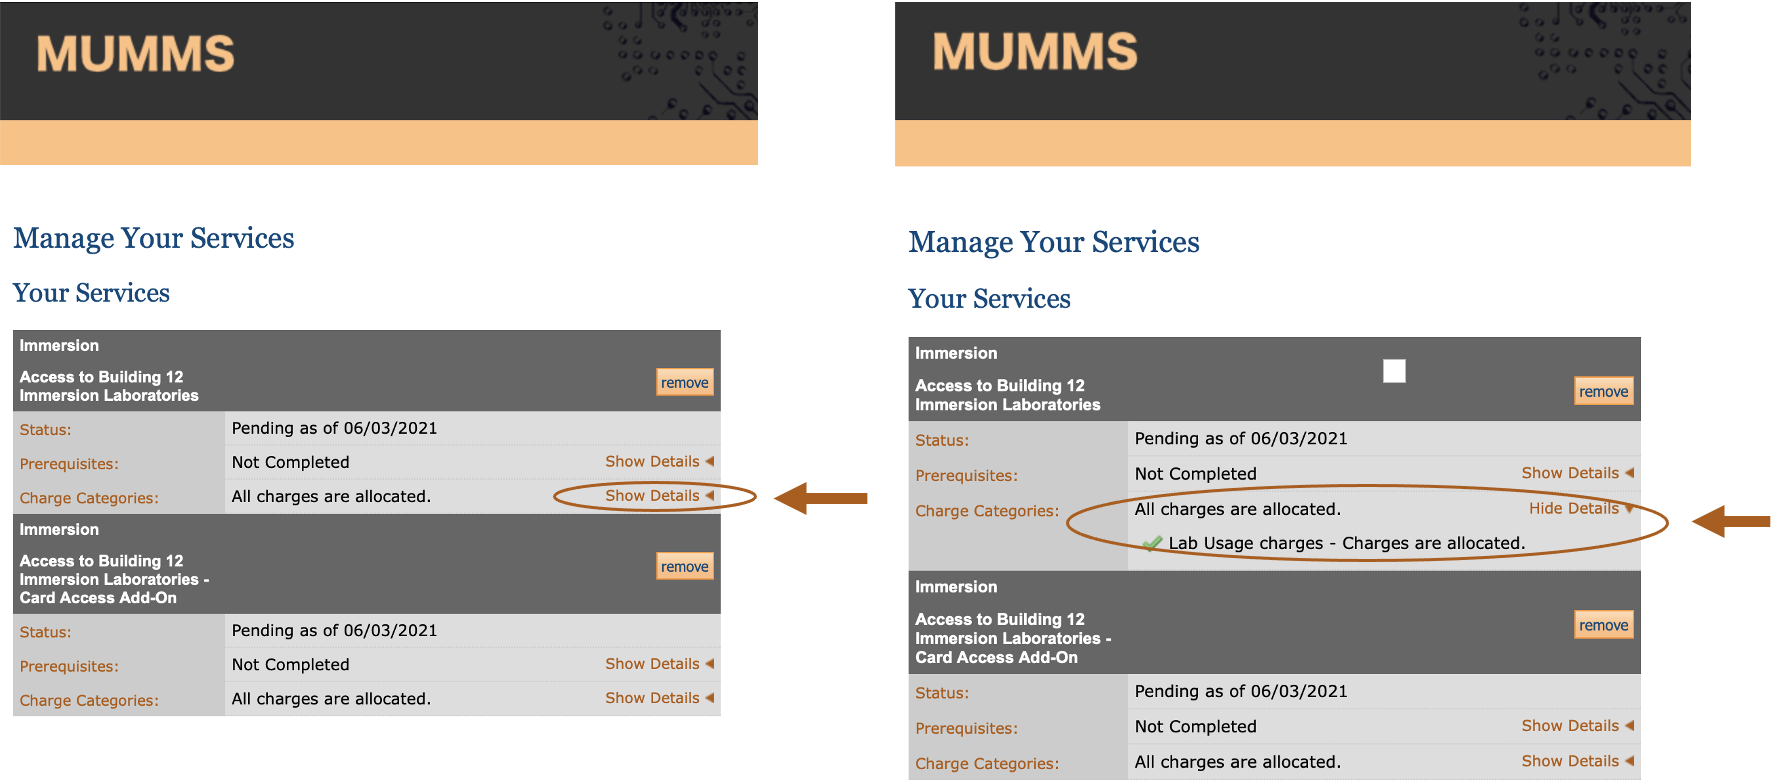 MUMMS Charge Categories